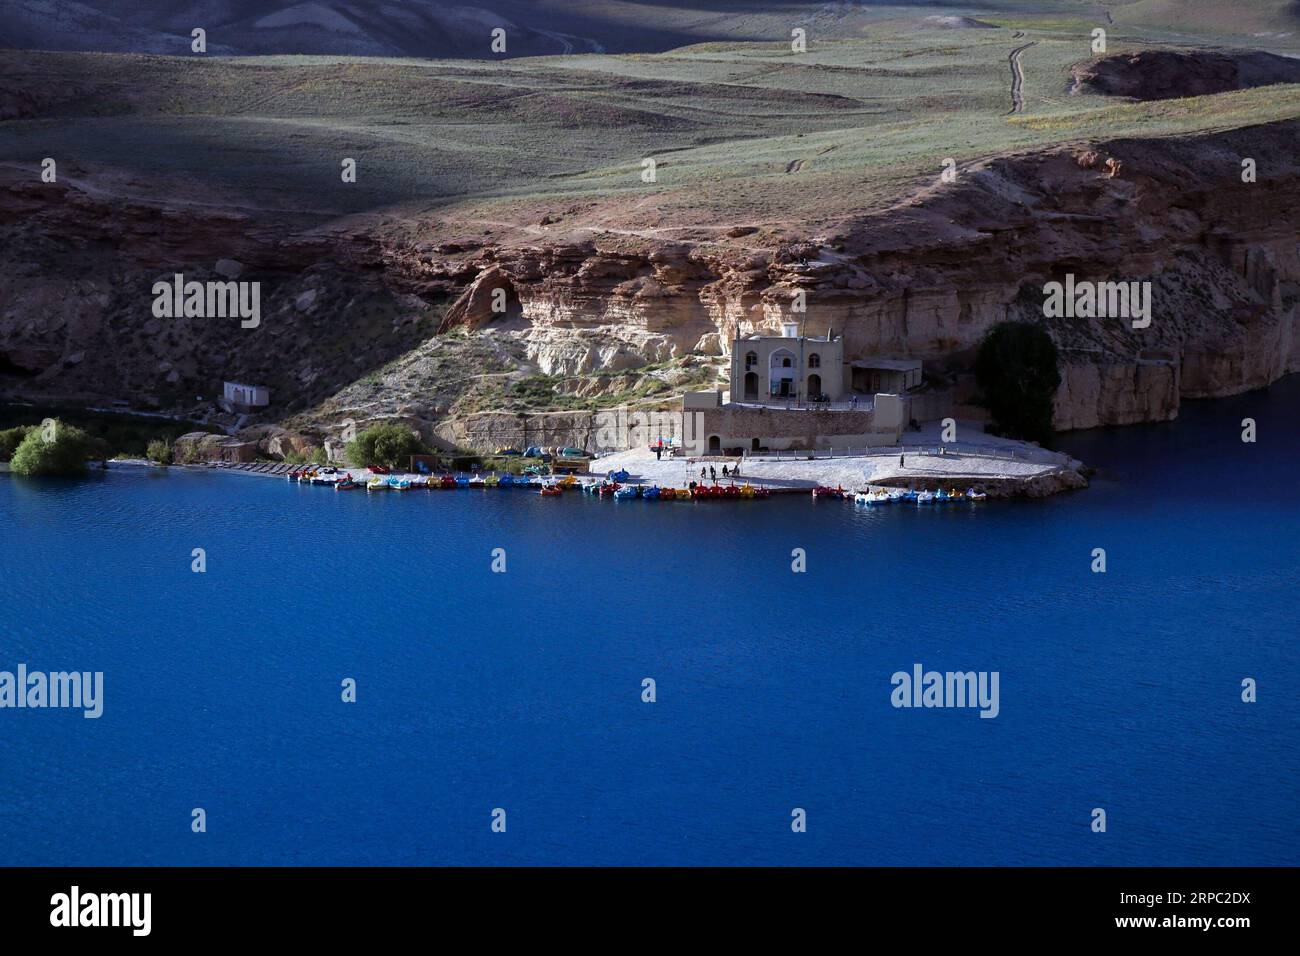 (190622) -- BEIJING, June 22, 2019 -- Photo taken on June 19, 2019 shows the Band-e-Amir lake in Bamyan province, central Afghanistan. ) XINHUA PHOTOS OF THE DAY NoorxAzizi PUBLICATIONxNOTxINxCHN Stock Photo